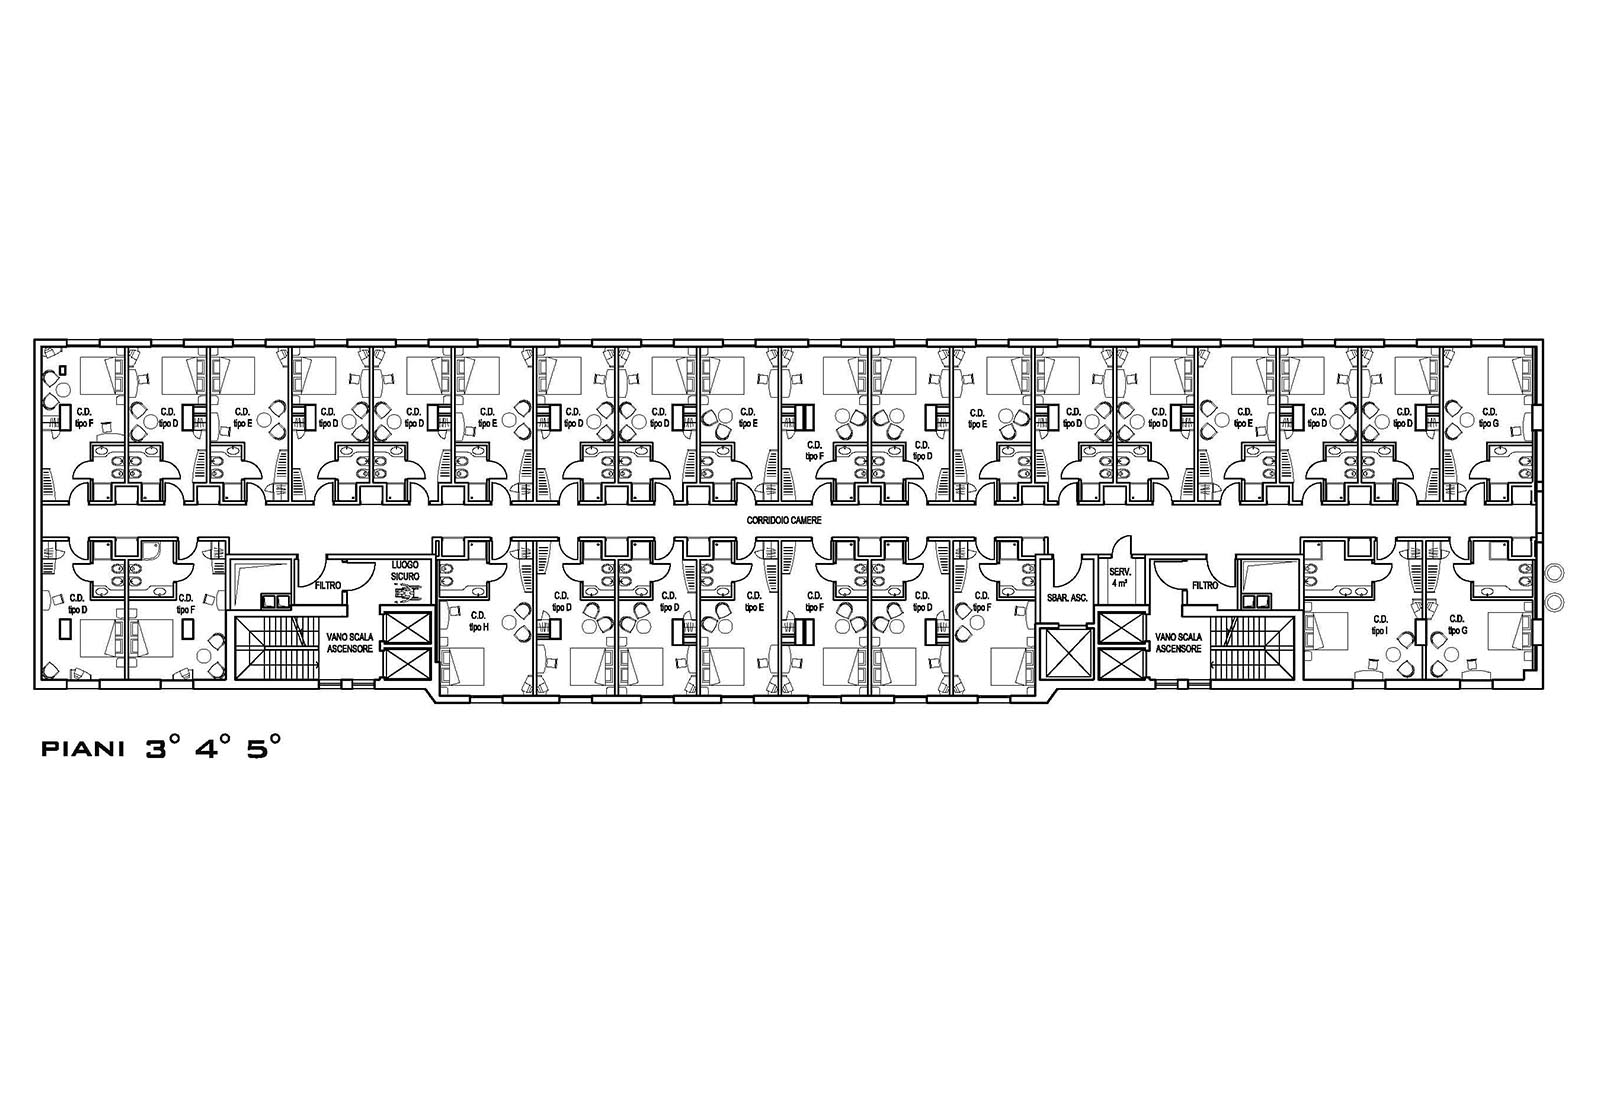 Hotel in Fantoli street Milan - Plan 3rd, 4th and 5th floors